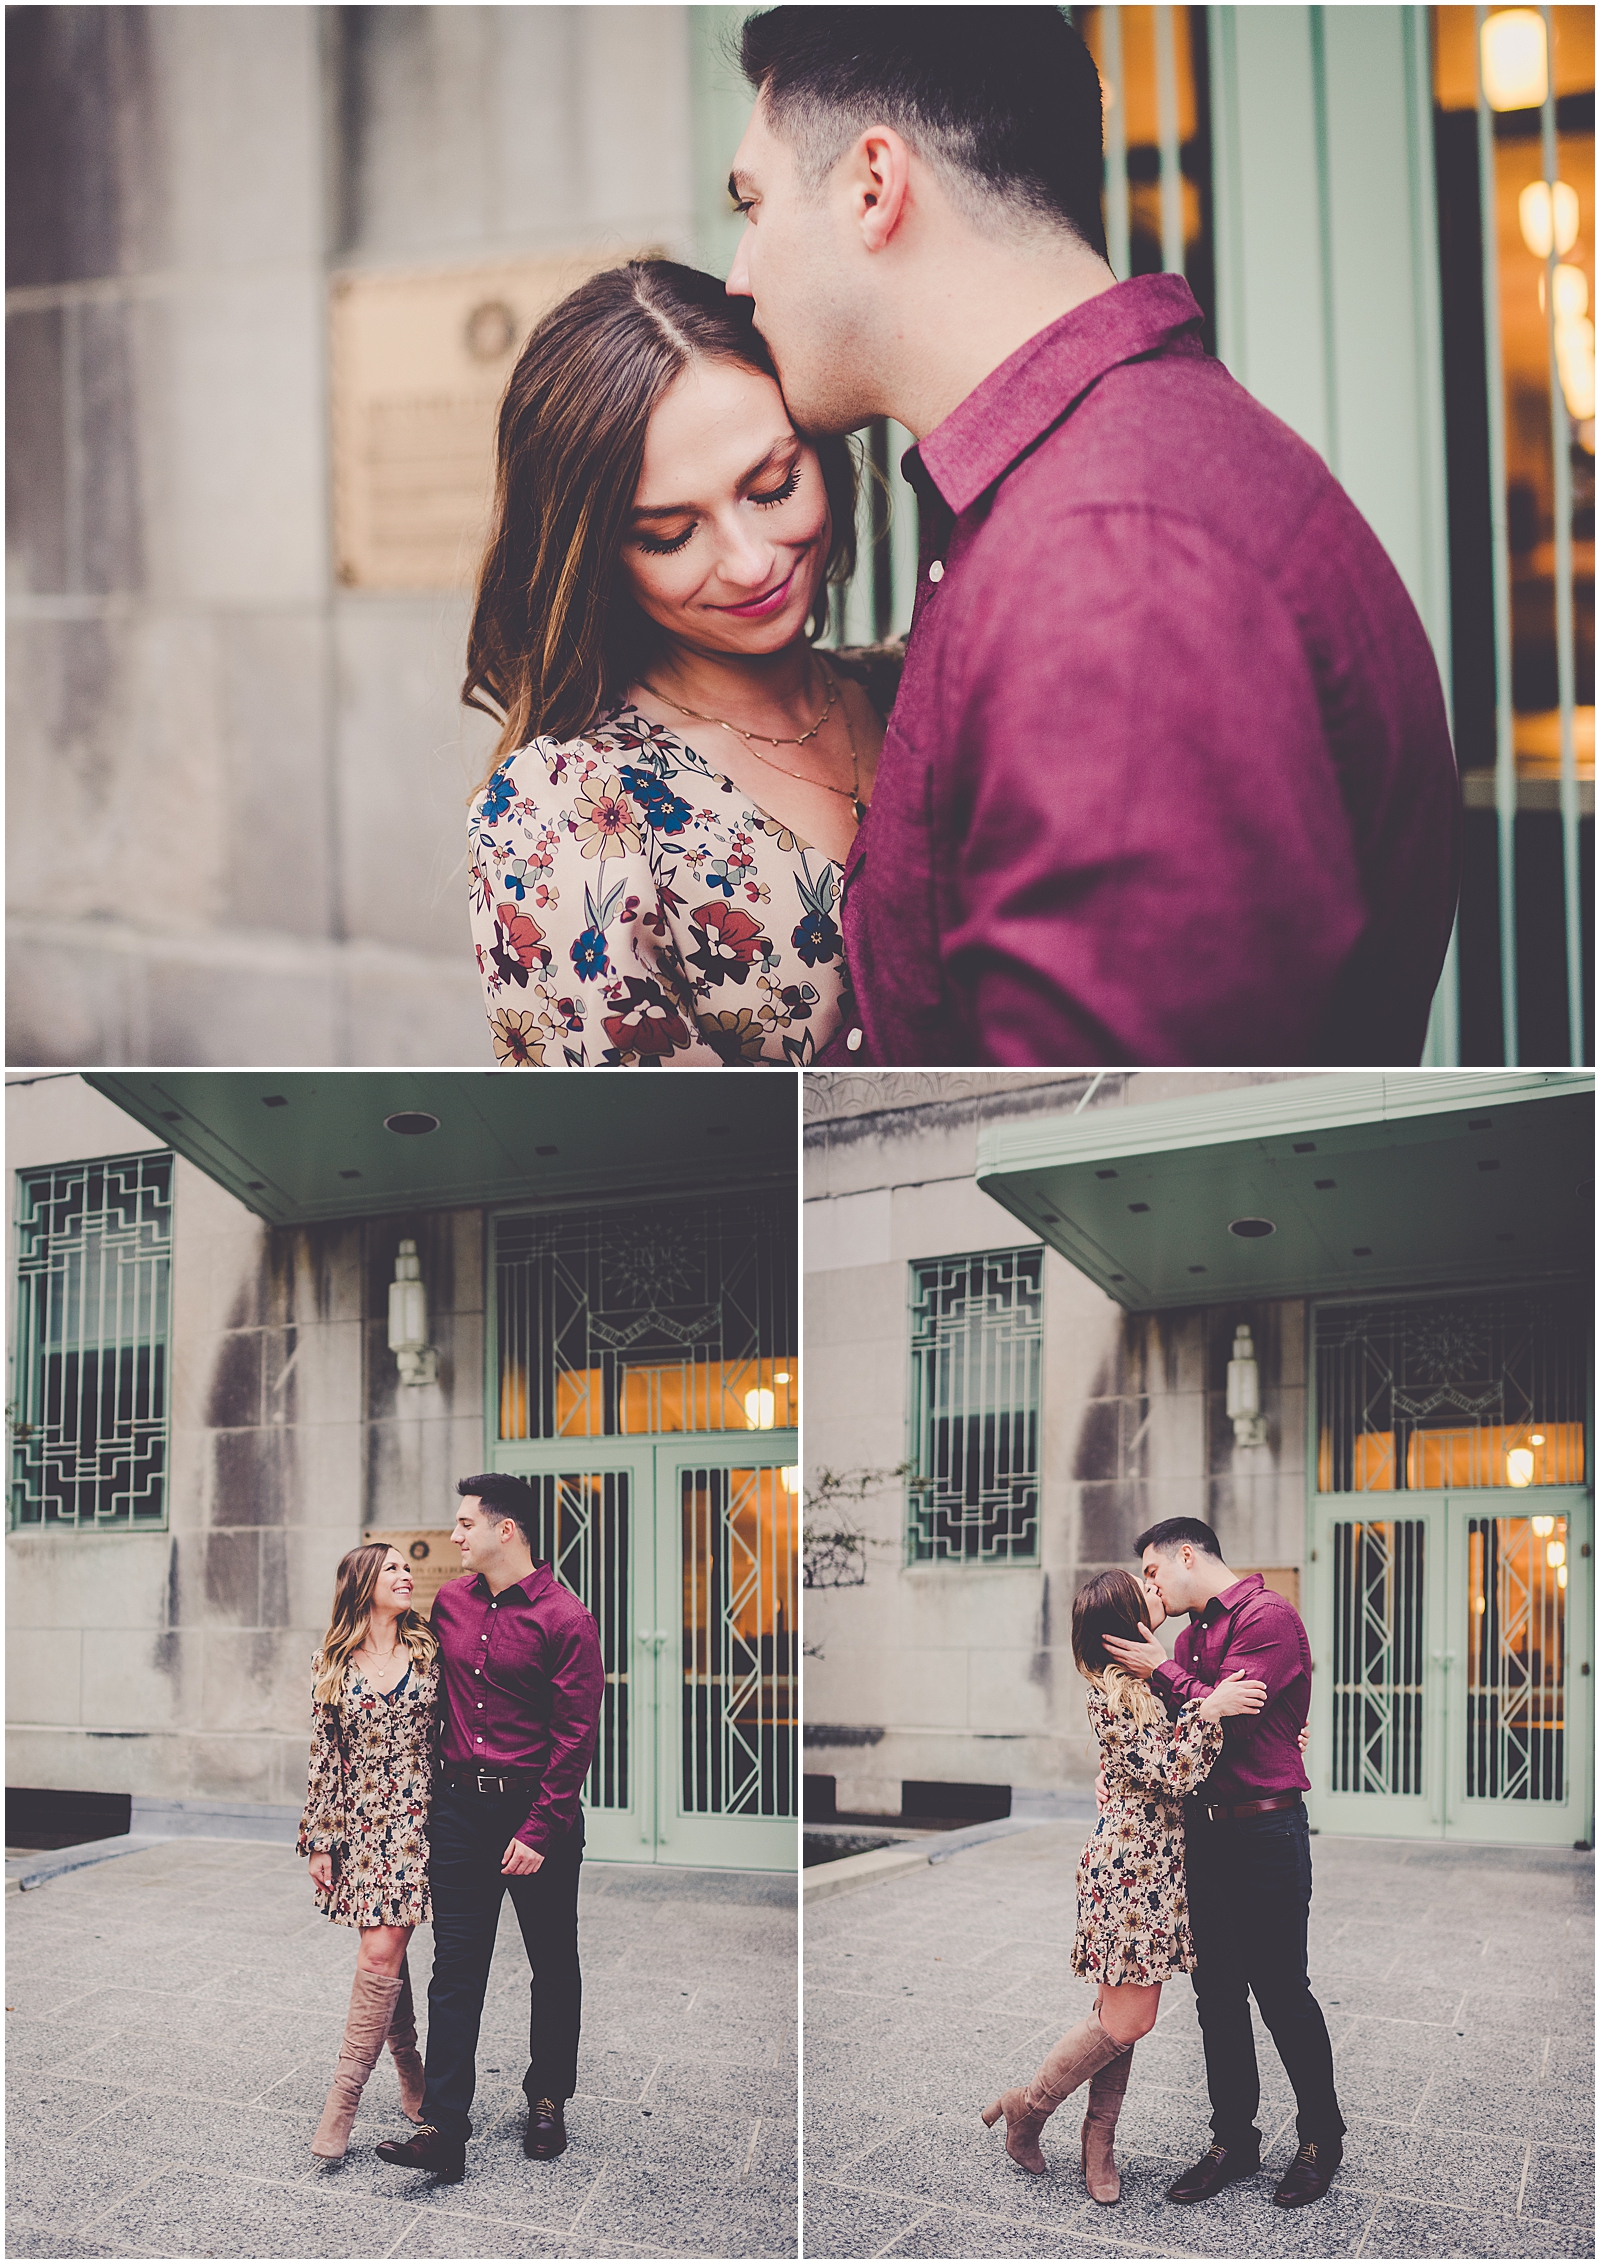 Emily and Milan's October Loyola University engagement photos in Chicago, IL with Chicagoland wedding photographer Kara Evans Photographer.